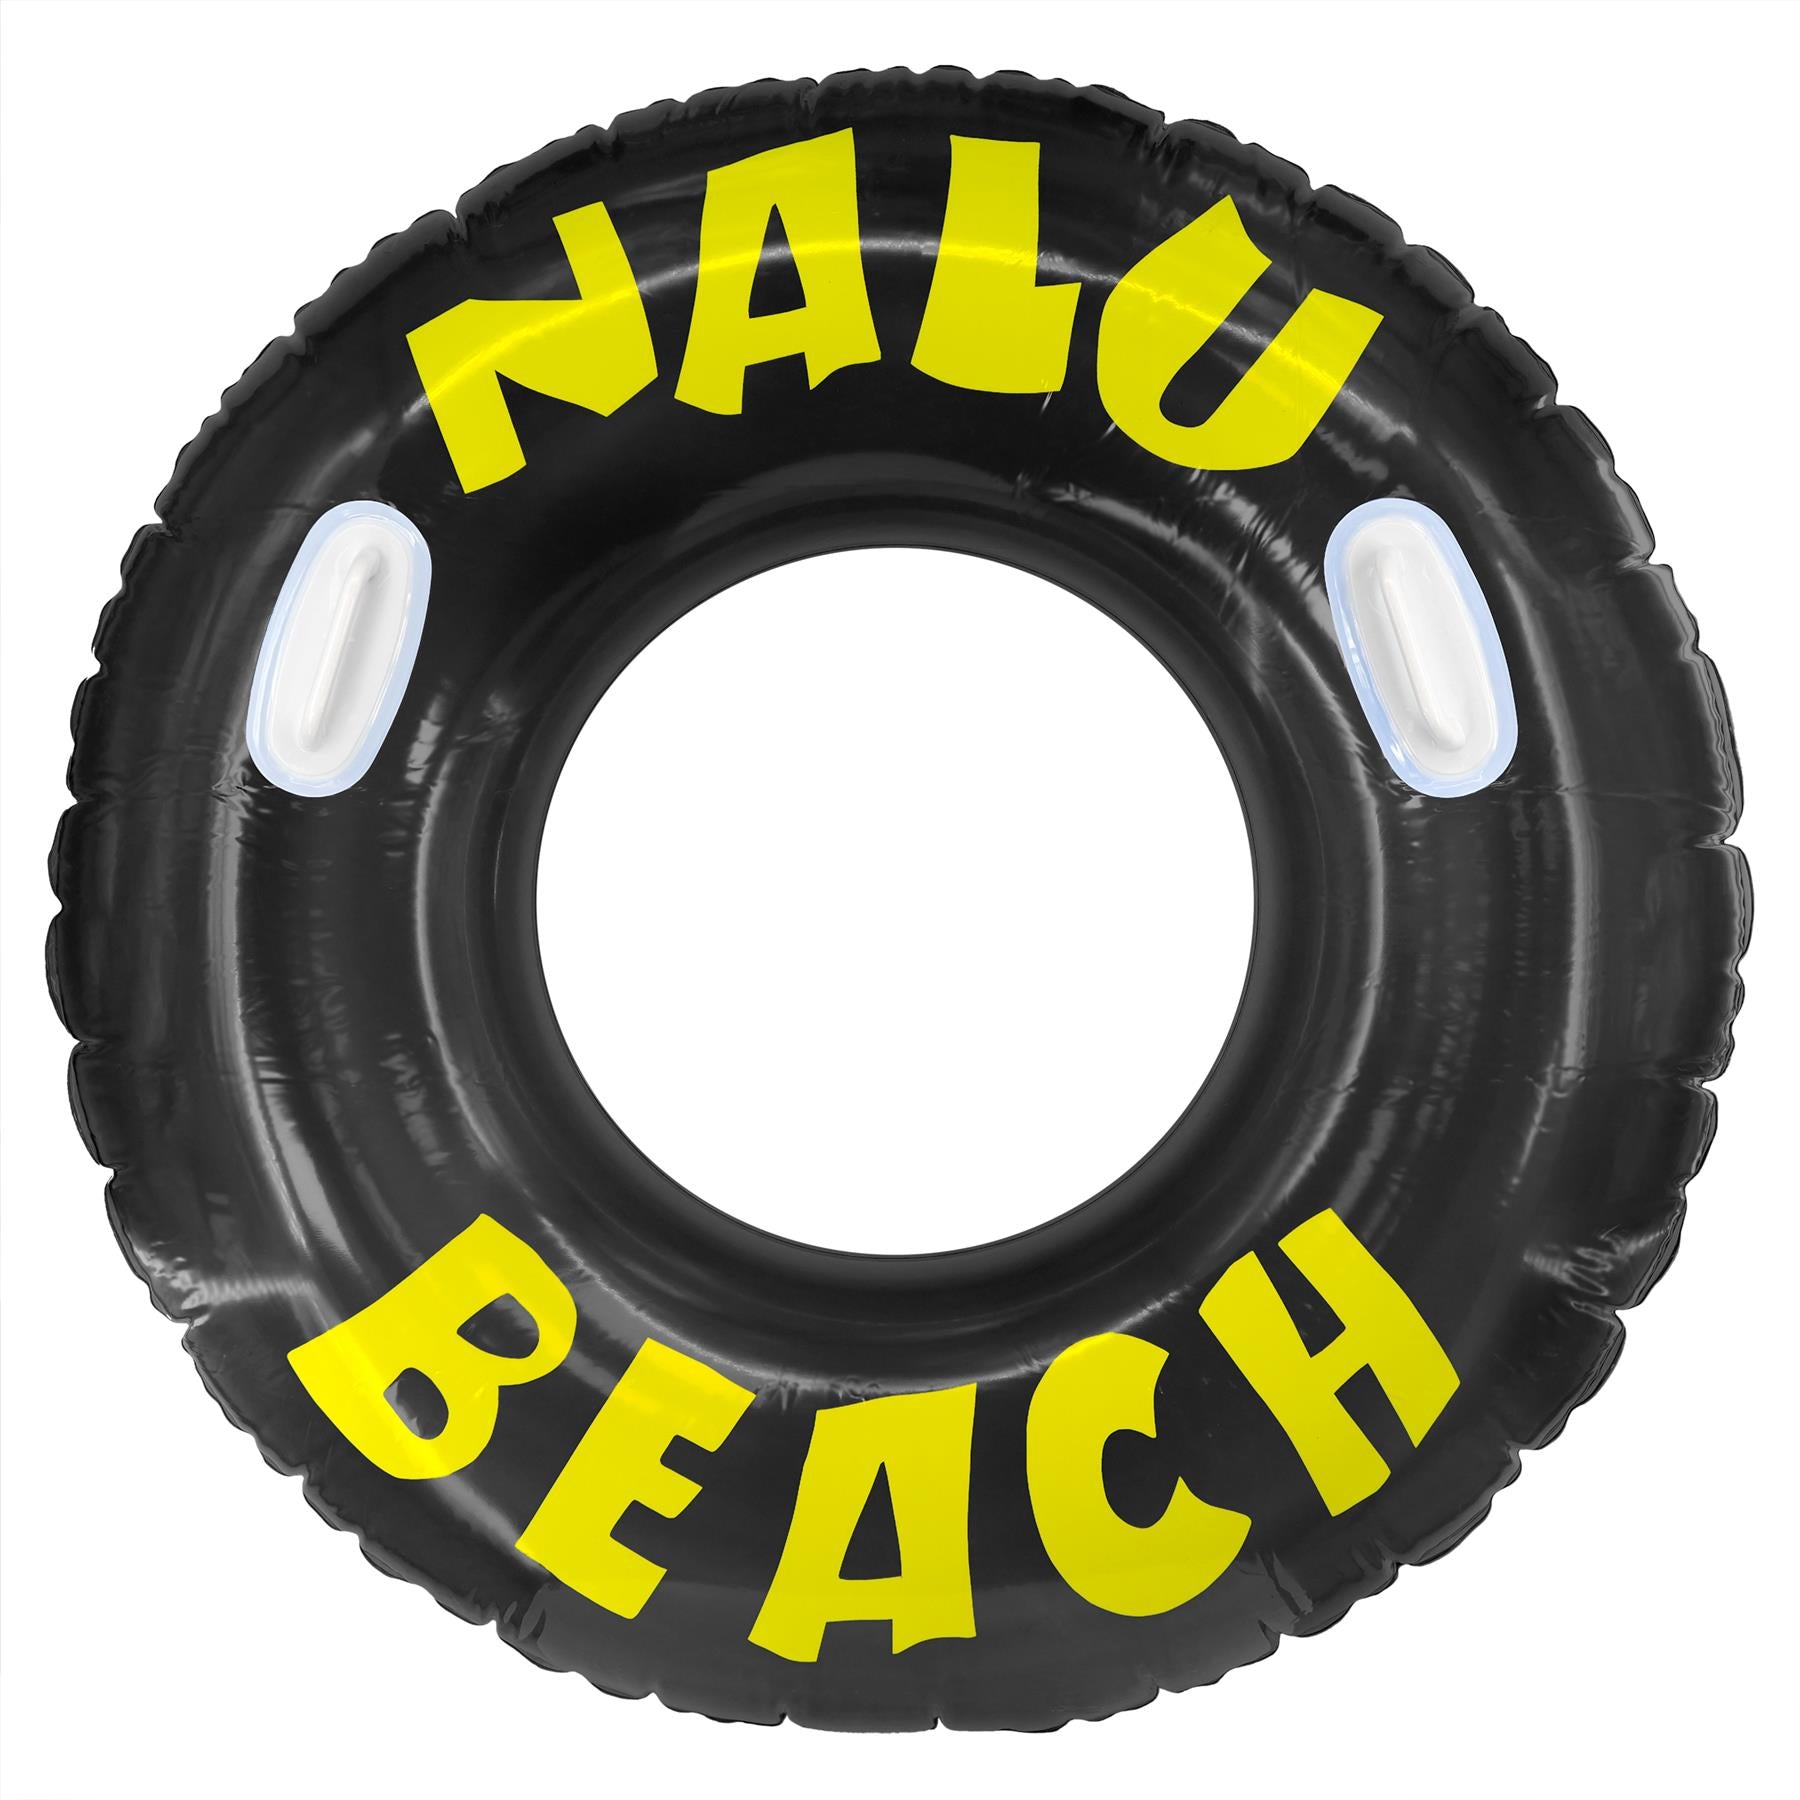 Nalu Black Turbo Tyre Ring With Handles 47" by Nalu - The Magic Toy Shop